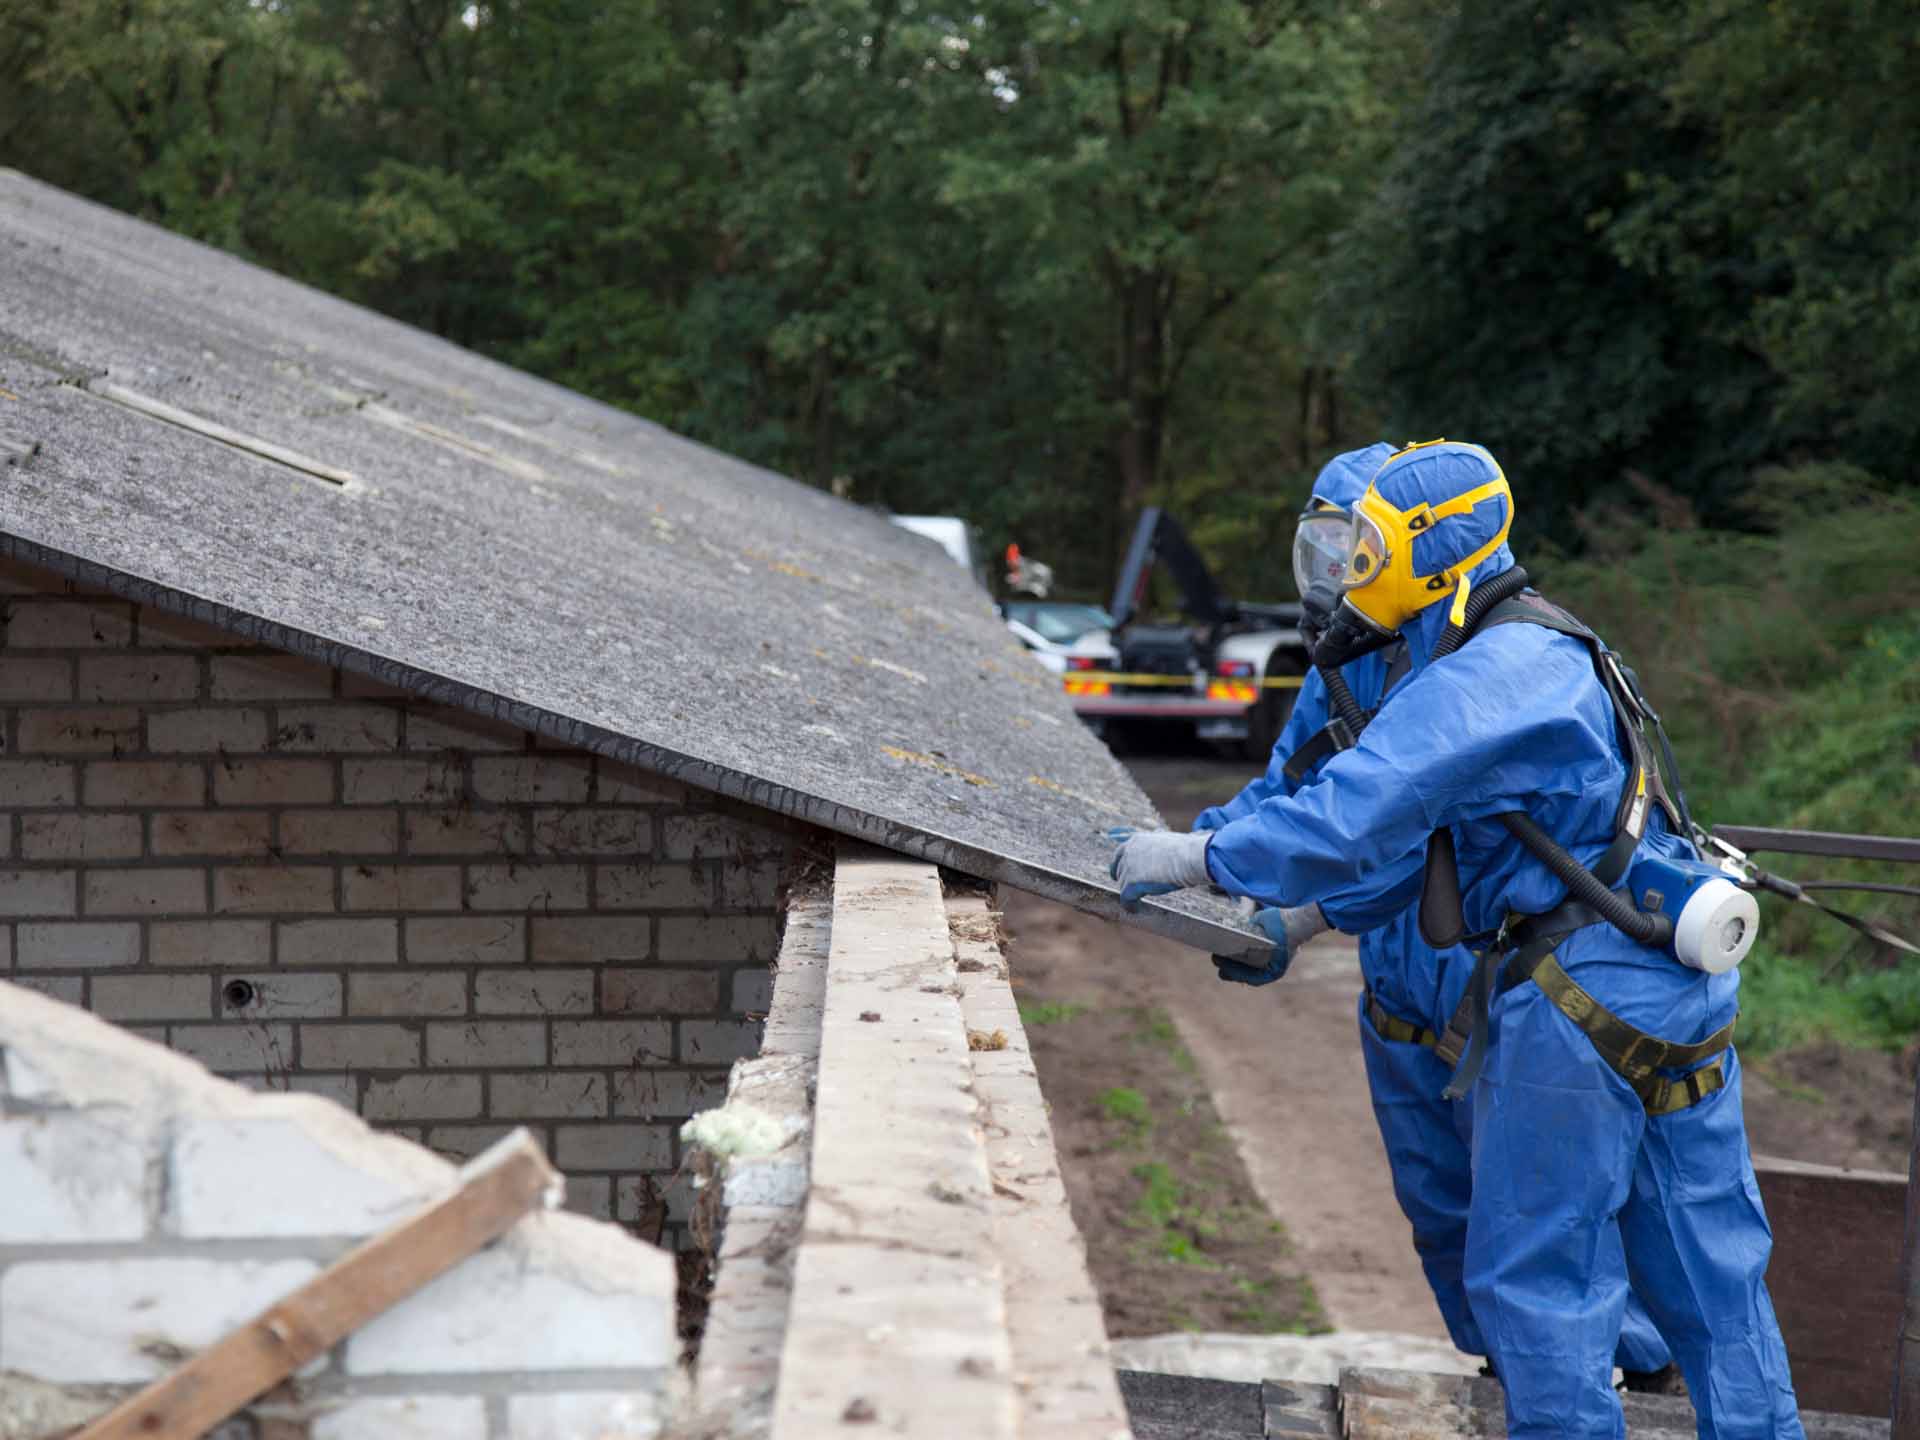 Leave asbestos to the experts 